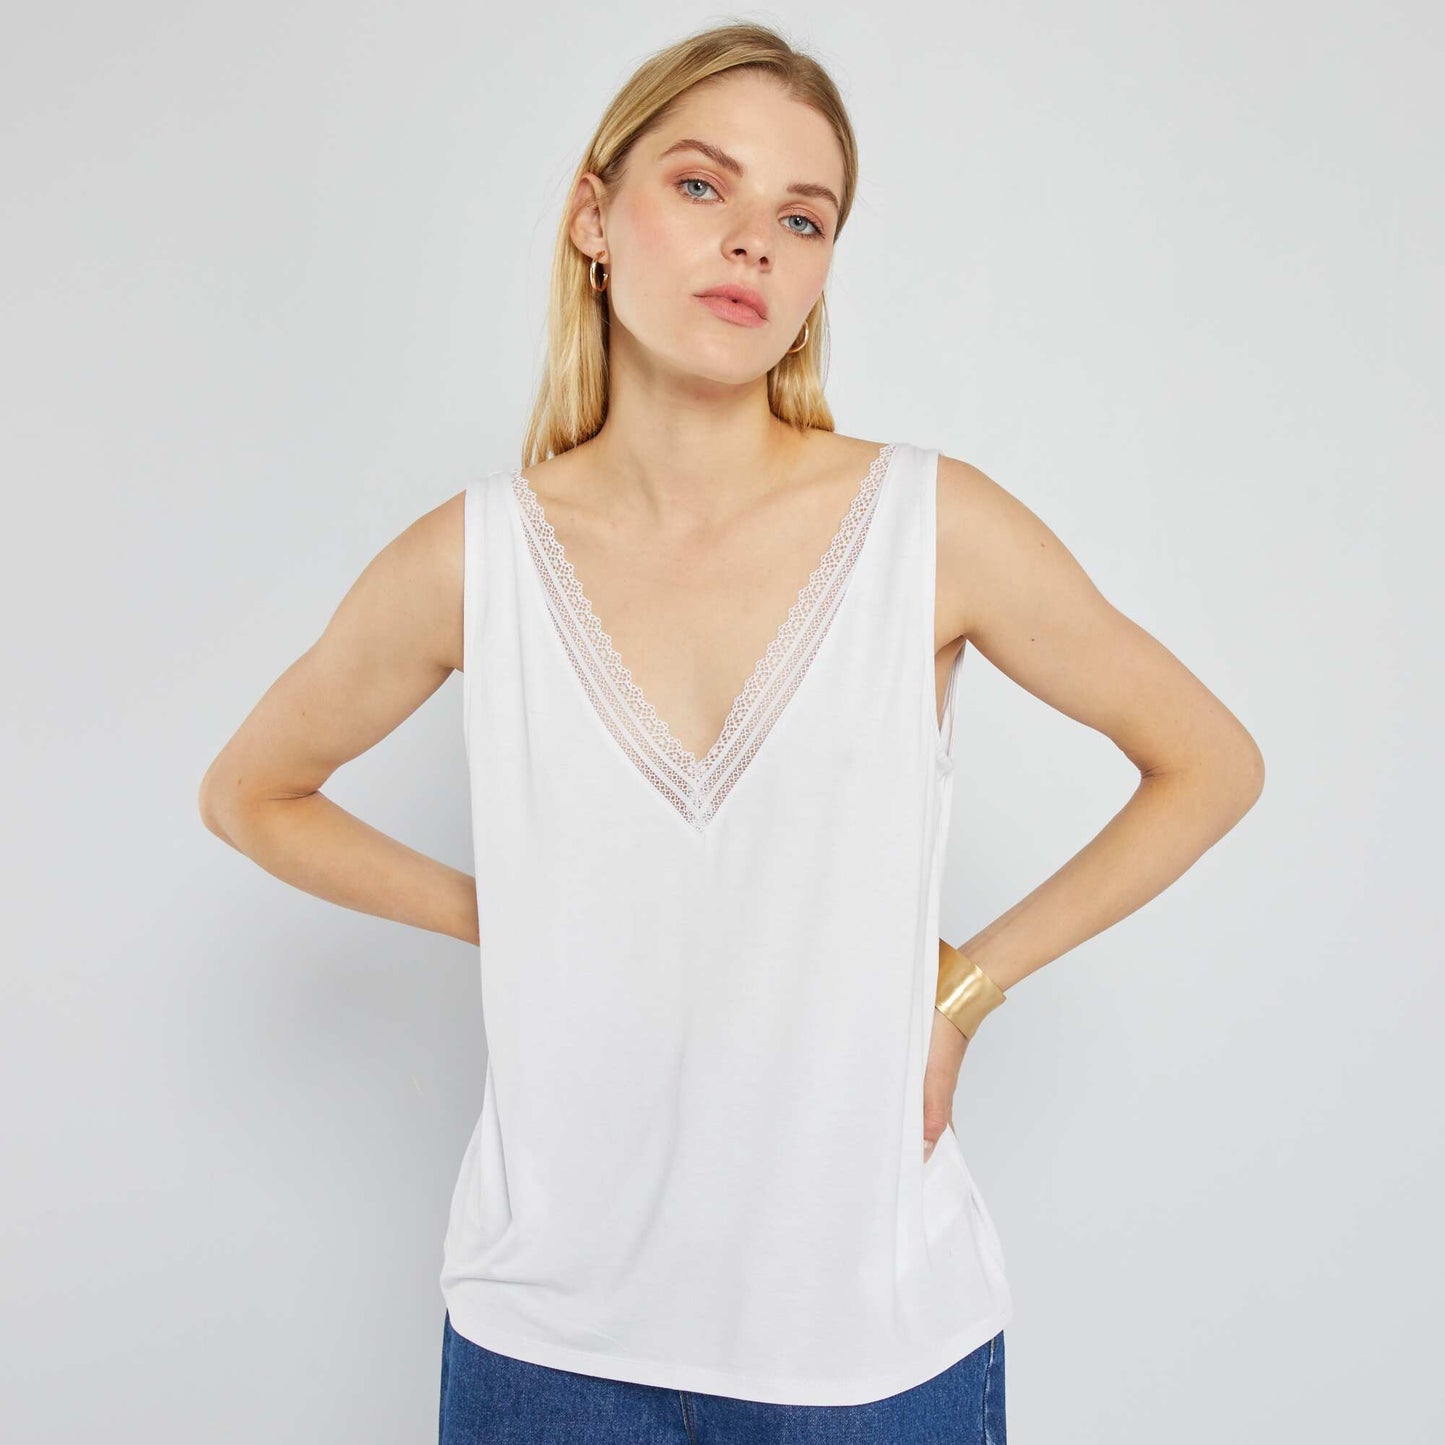 Stretch vest top with lace White